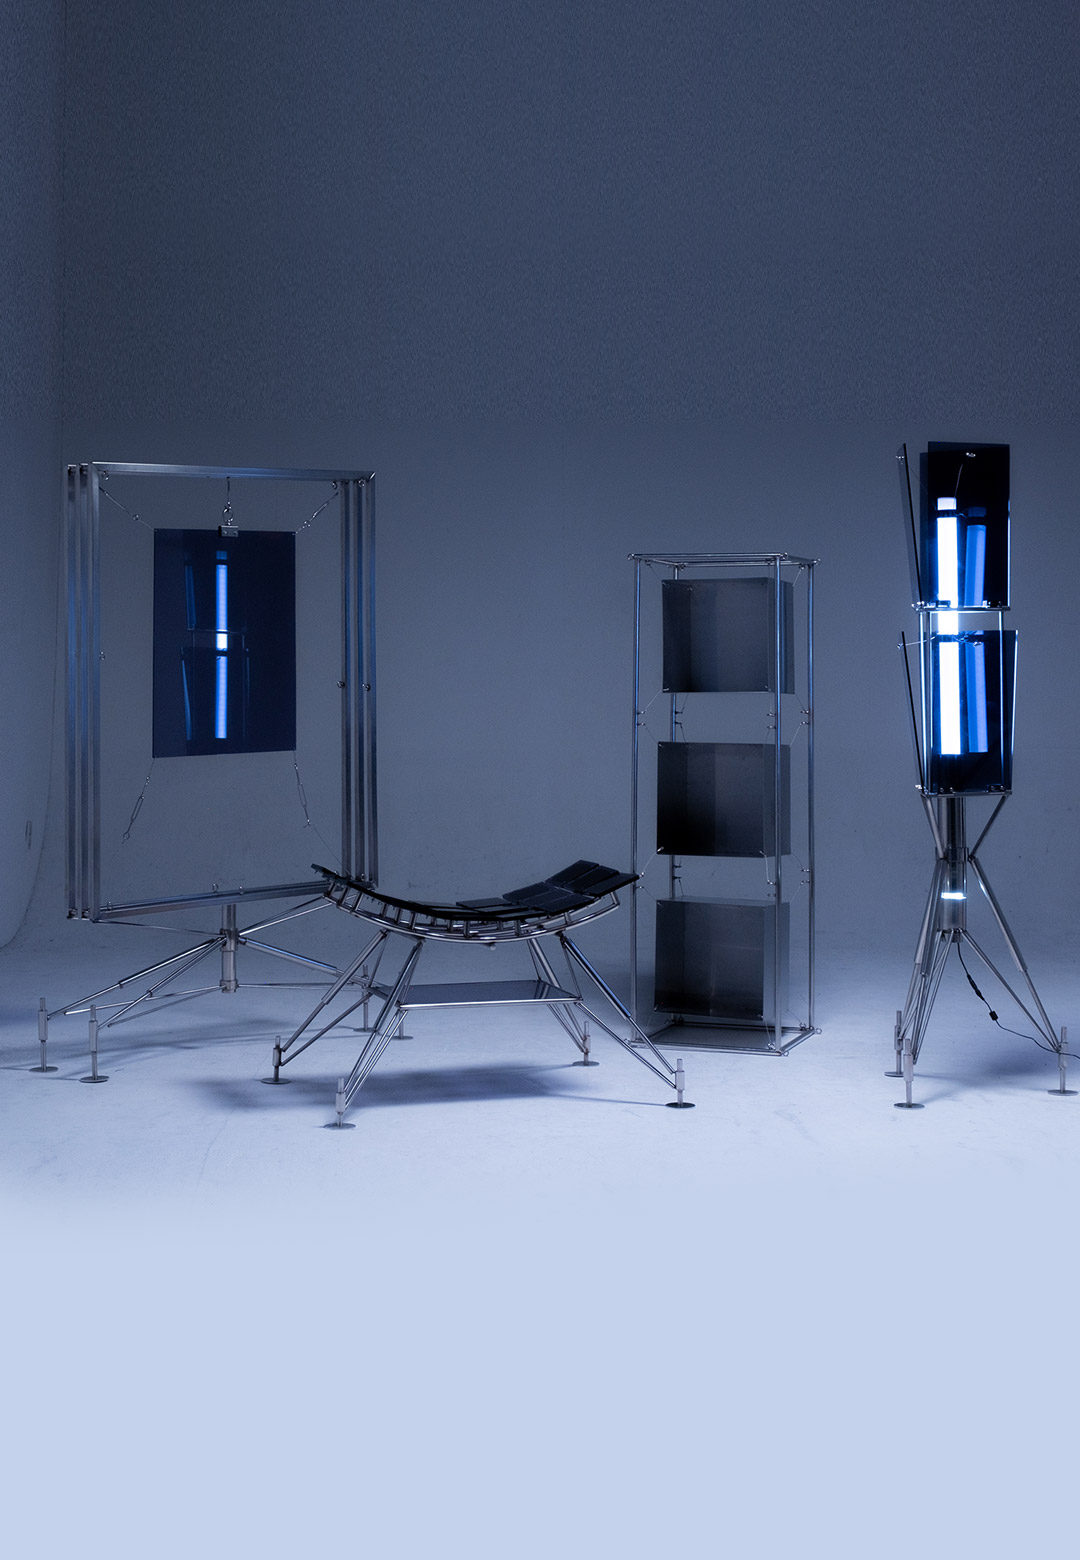 Beomseok Chae envisions the future of furniture with POST-COLLAPSE